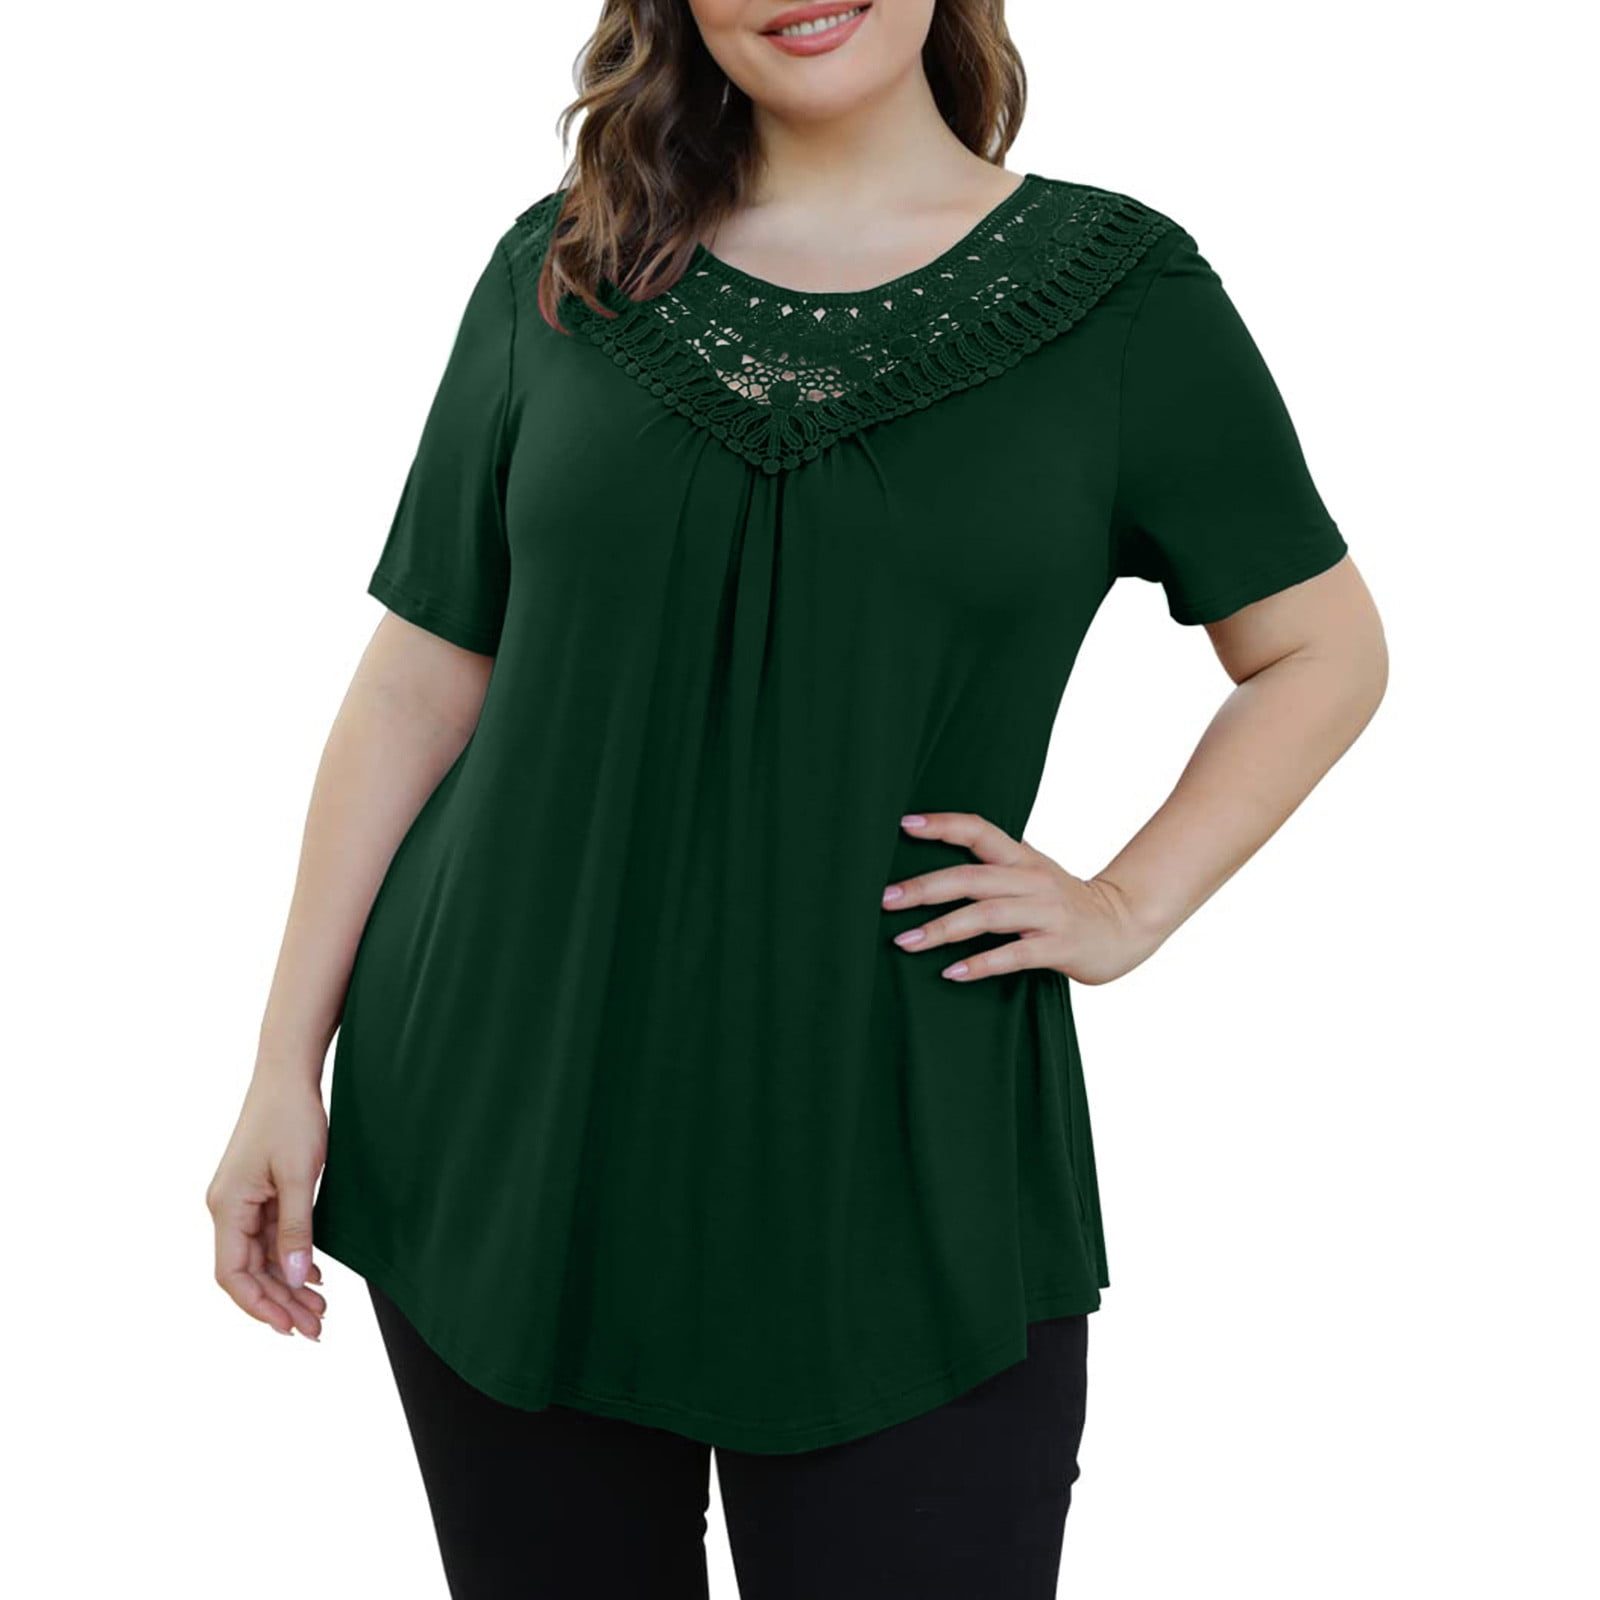 Summer Savings Clearance! zanvin plus size womens clothing, Plus Size Tops  for Women Tunic Floral Casual Short Sleeves T Shirts Flowy Blouses,for